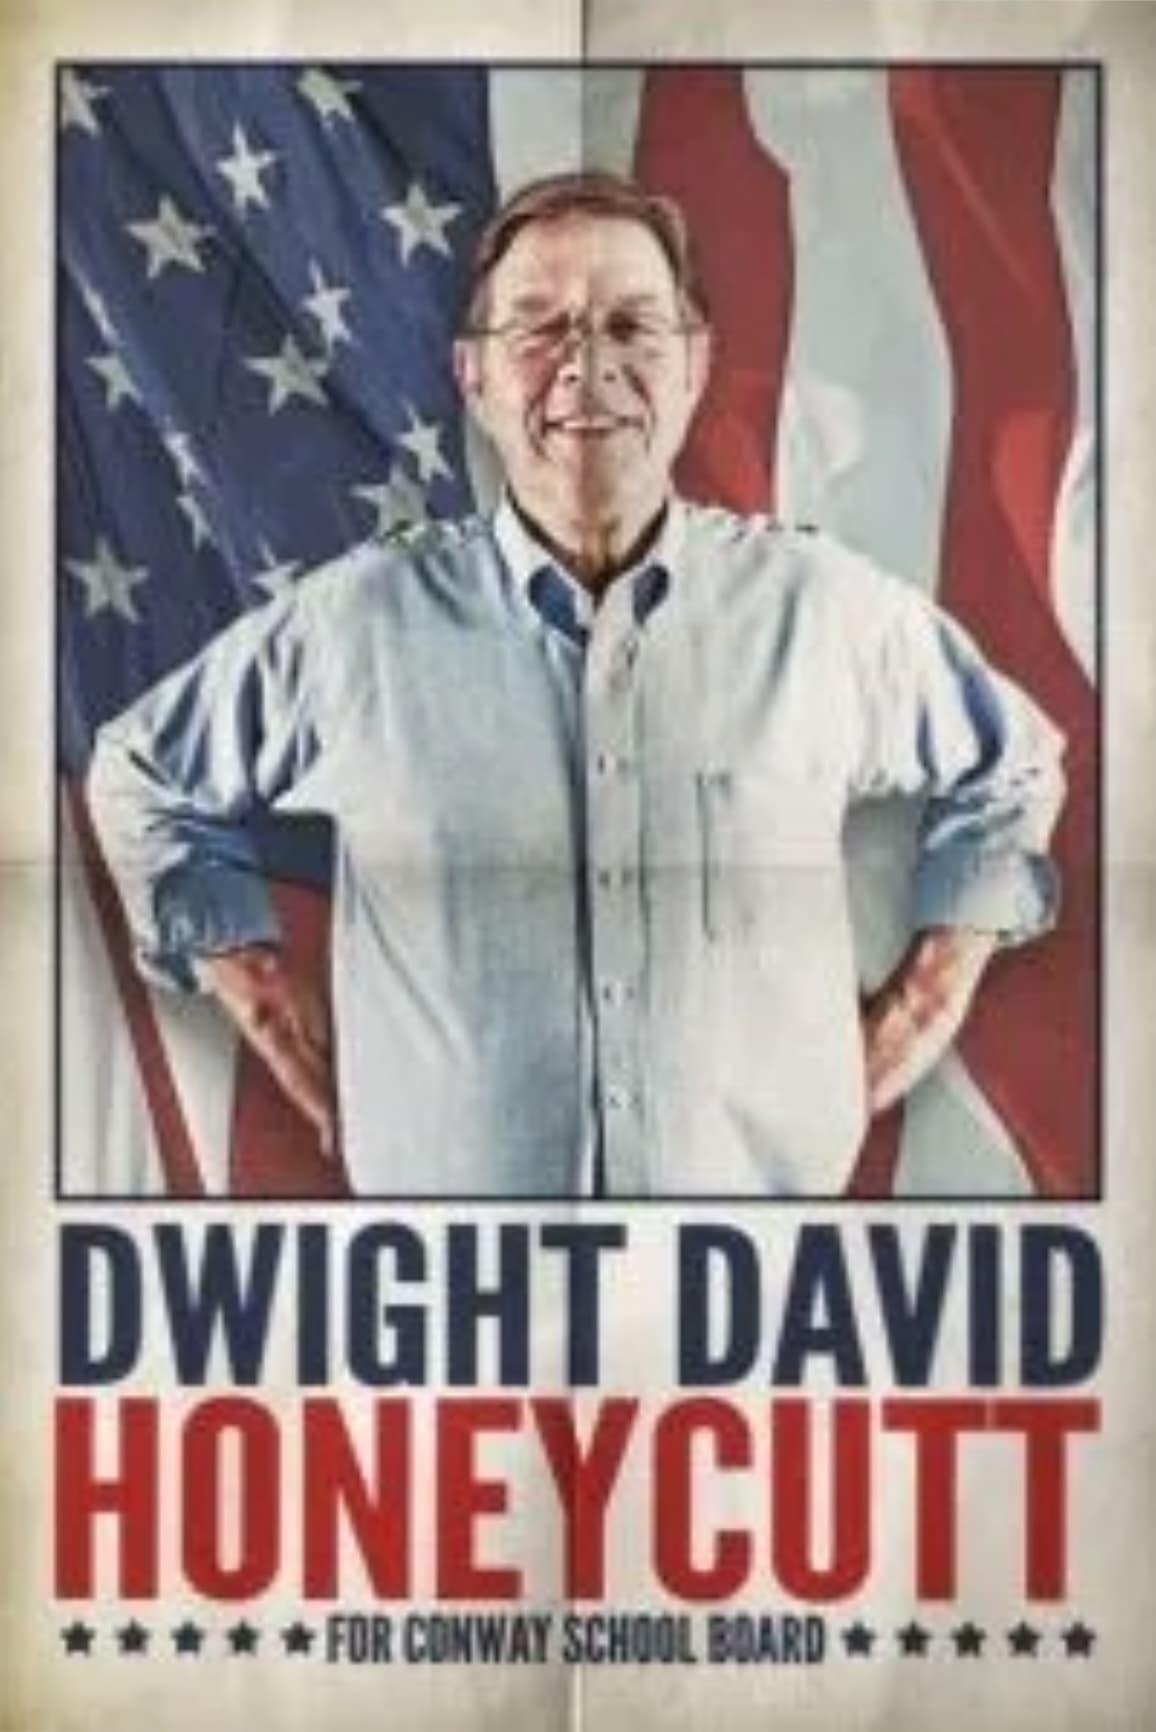 Dwight David Honeycutt for Conway School Board poster